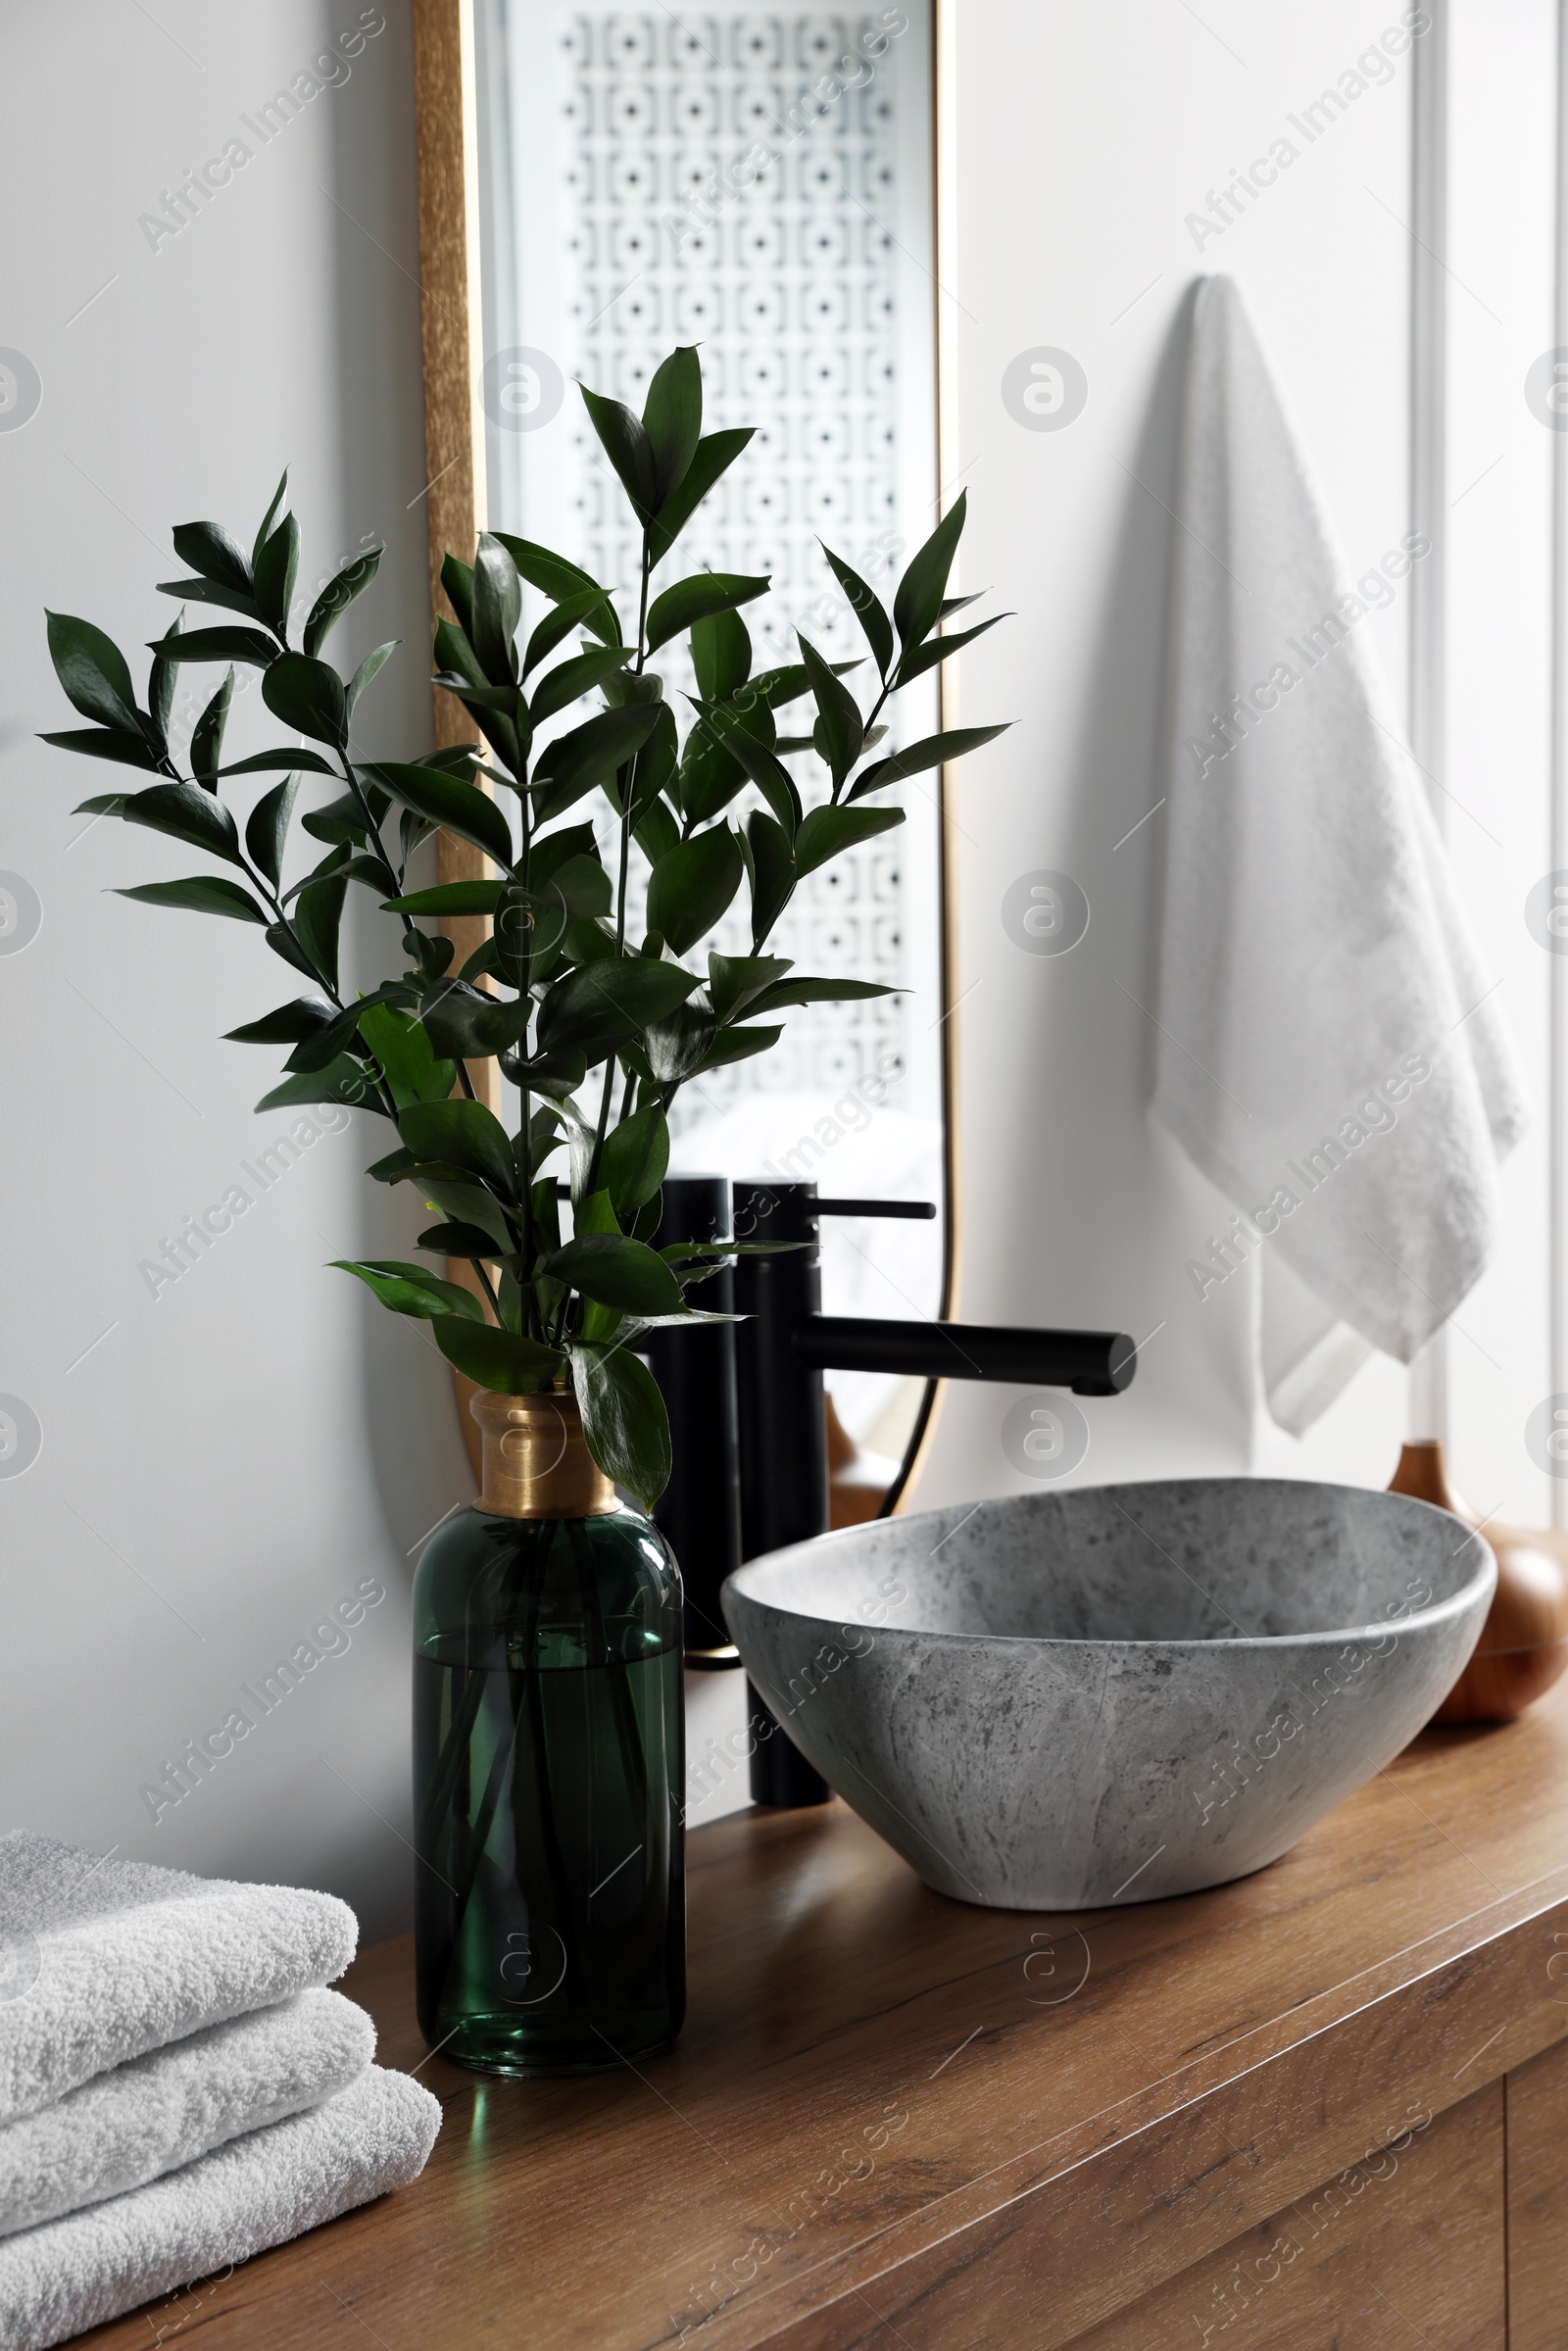 Photo of Eucalyptus branches and folded towels near stylish vessel sink on bathroom vanity. Interior design